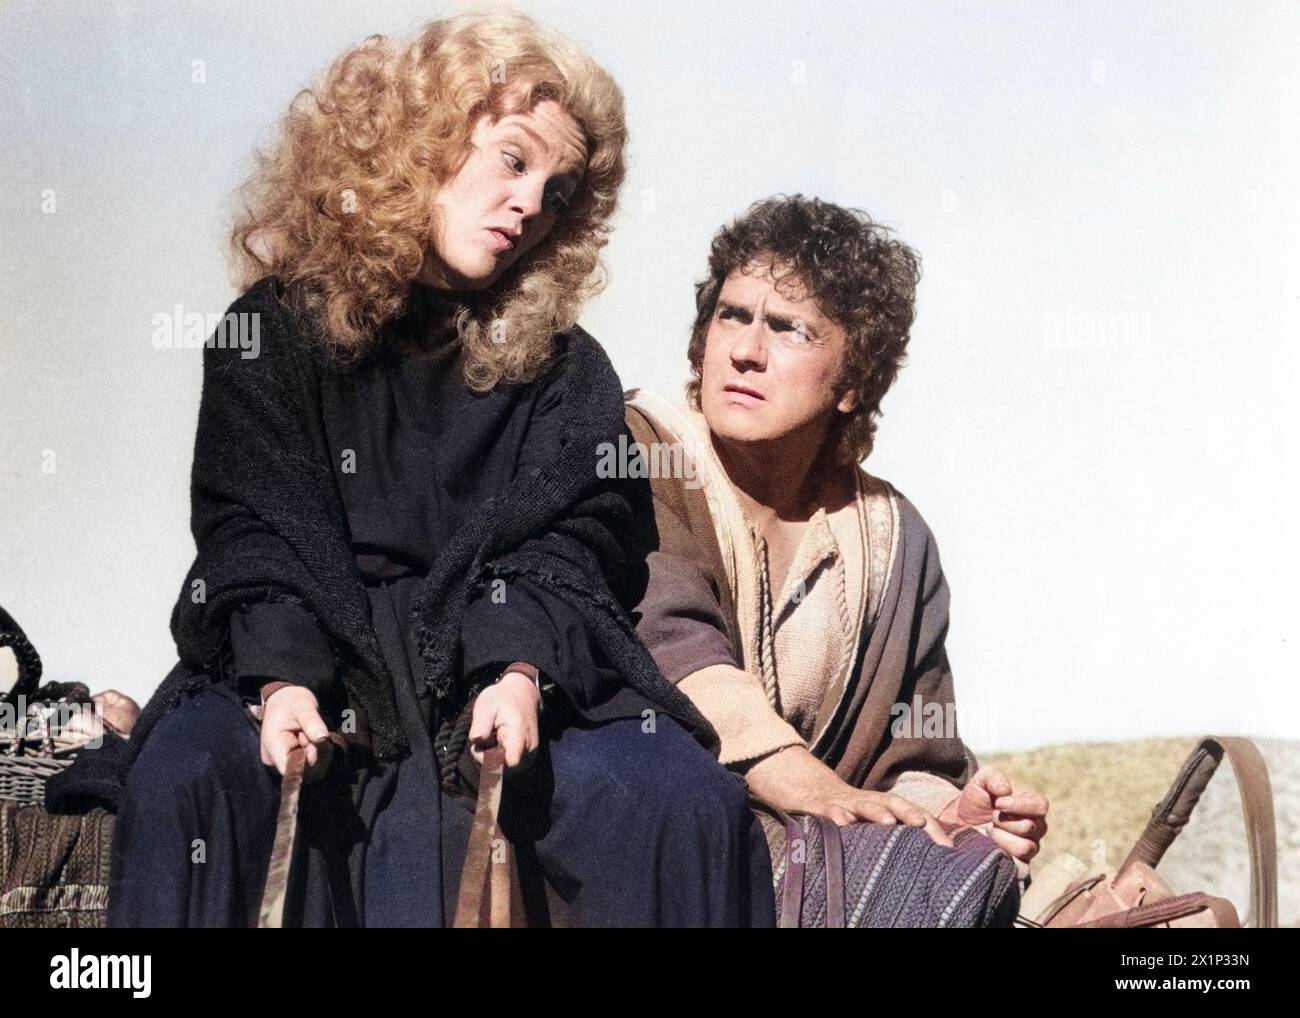 Madeline Kahn, Dudley Moore, on-set of the film, 'Wholly Moses', Columbia Pictures, 1979 Stock Photo